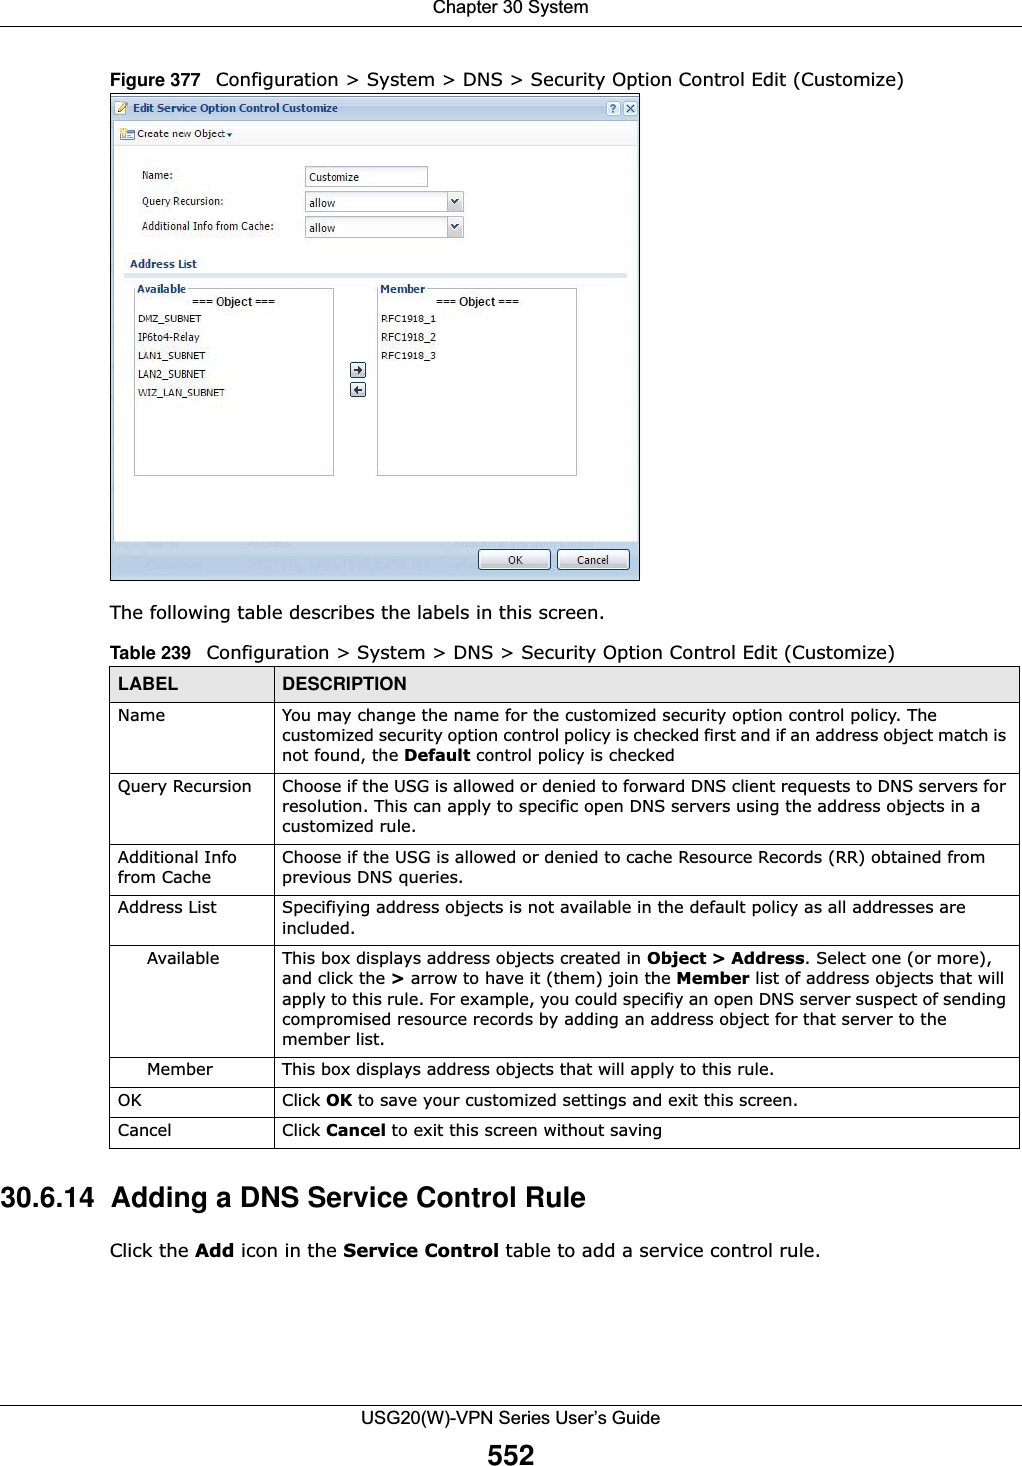 Chapter 30 SystemUSG20(W)-VPN Series User’s Guide552Figure 377   Configuration &gt; System &gt; DNS &gt; Security Option Control Edit (Customize) The following table describes the labels in this screen. 30.6.14  Adding a DNS Service Control RuleClick the Add icon in the Service Control table to add a service control rule. Table 239   Configuration &gt; System &gt; DNS &gt; Security Option Control Edit (Customize) LABEL DESCRIPTIONName You may change the name for the customized security option control policy. The customized security option control policy is checked first and if an address object match is not found, the Default control policy is checkedQuery Recursion Choose if the USG is allowed or denied to forward DNS client requests to DNS servers for resolution. This can apply to specific open DNS servers using the address objects in a customized rule.Additional Info from CacheChoose if the USG is allowed or denied to cache Resource Records (RR) obtained from previous DNS queries.Address List Specifiying address objects is not available in the default policy as all addresses are included.Available This box displays address objects created in Object &gt; Address. Select one (or more), and click the &gt; arrow to have it (them) join the Member list of address objects that will apply to this rule. For example, you could specifiy an open DNS server suspect of sending compromised resource records by adding an address object for that server to the member list.Member This box displays address objects that will apply to this rule.OK Click OK to save your customized settings and exit this screen. Cancel Click Cancel to exit this screen without saving